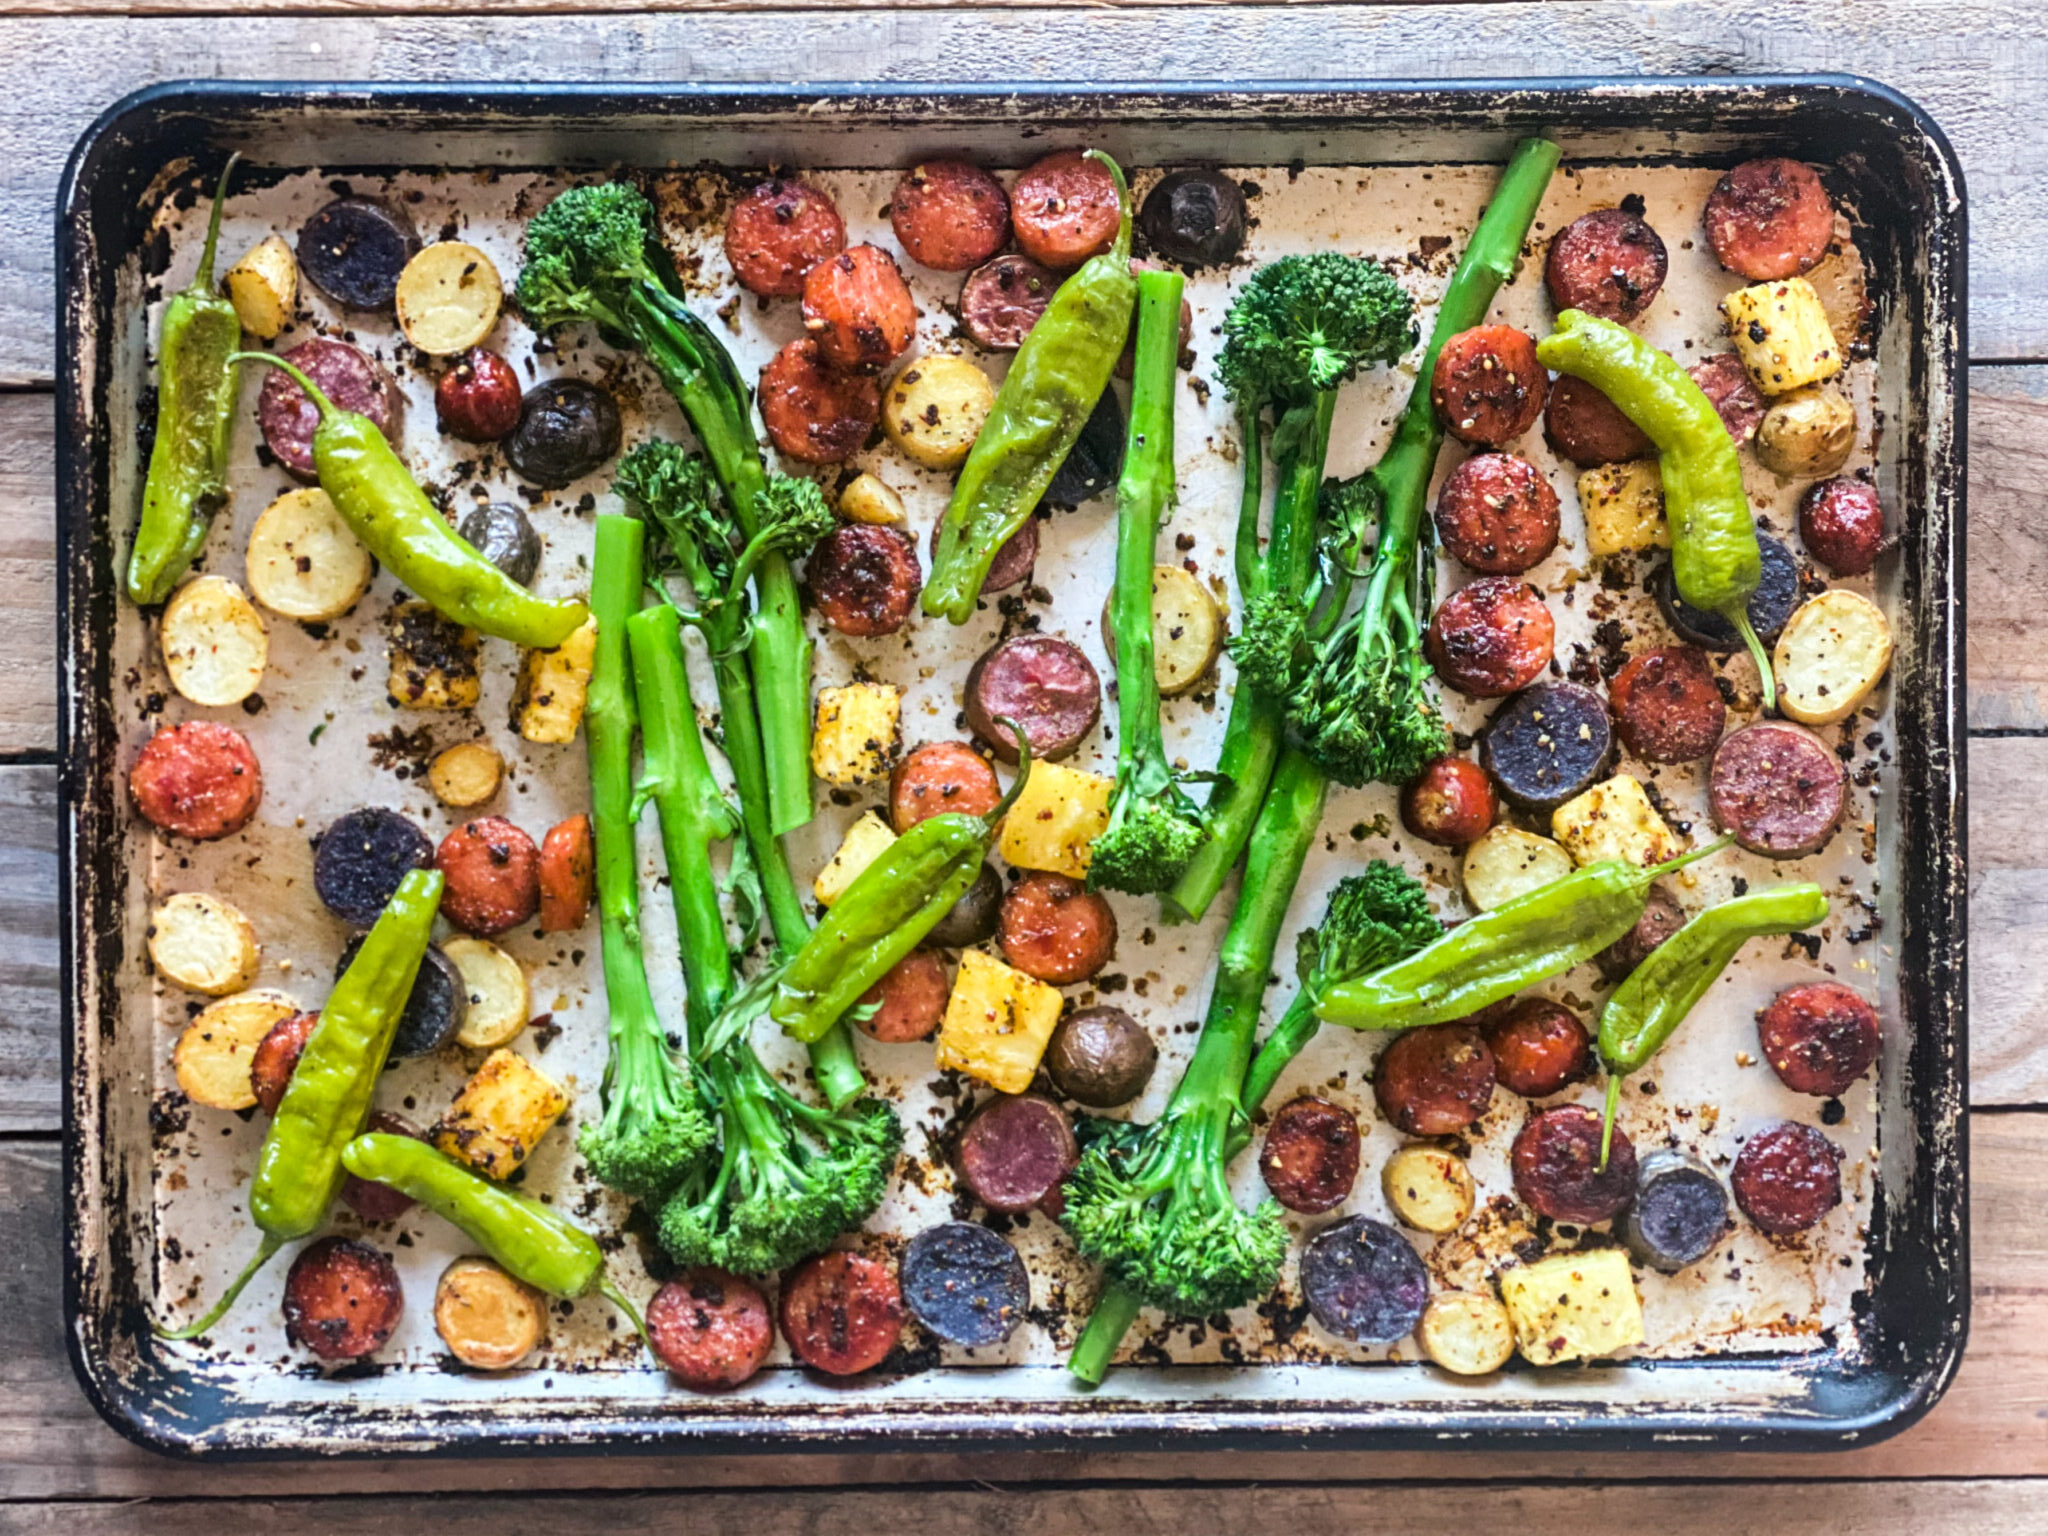 Sheet pan of sausages with broccolini, pinapple and shishito peppers